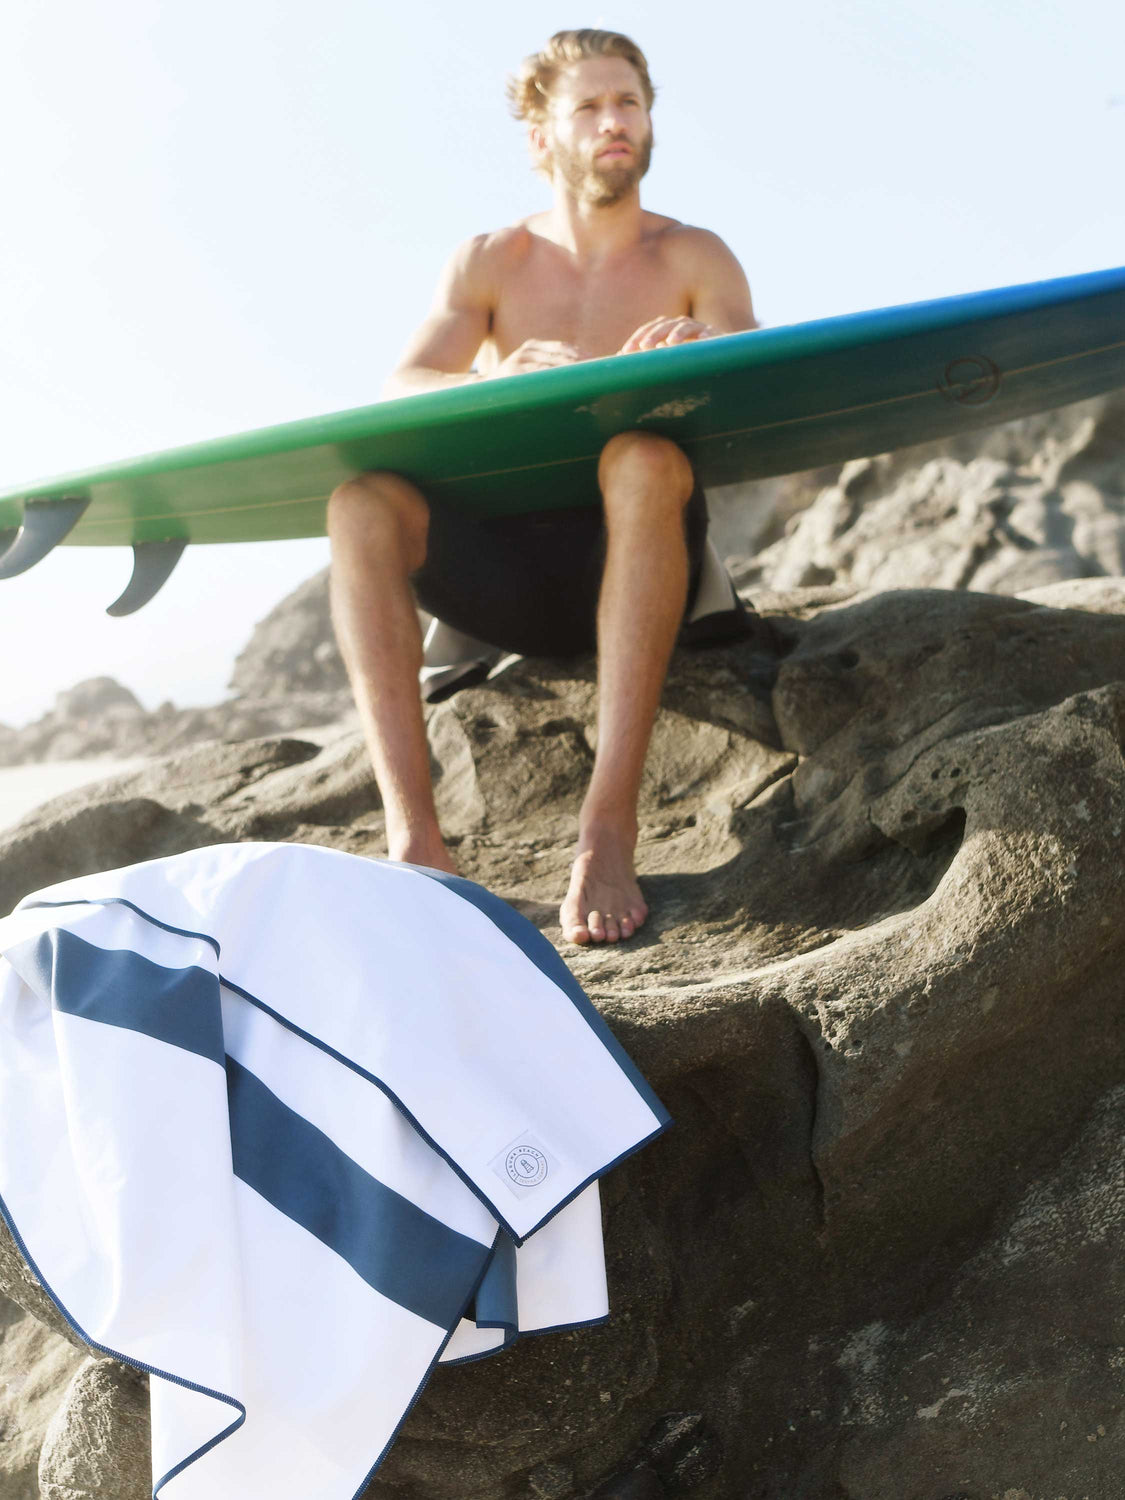 An oversized navy blue striped microfiber beach towel sitting at the foot of a rock near a man waxing his surfboard.